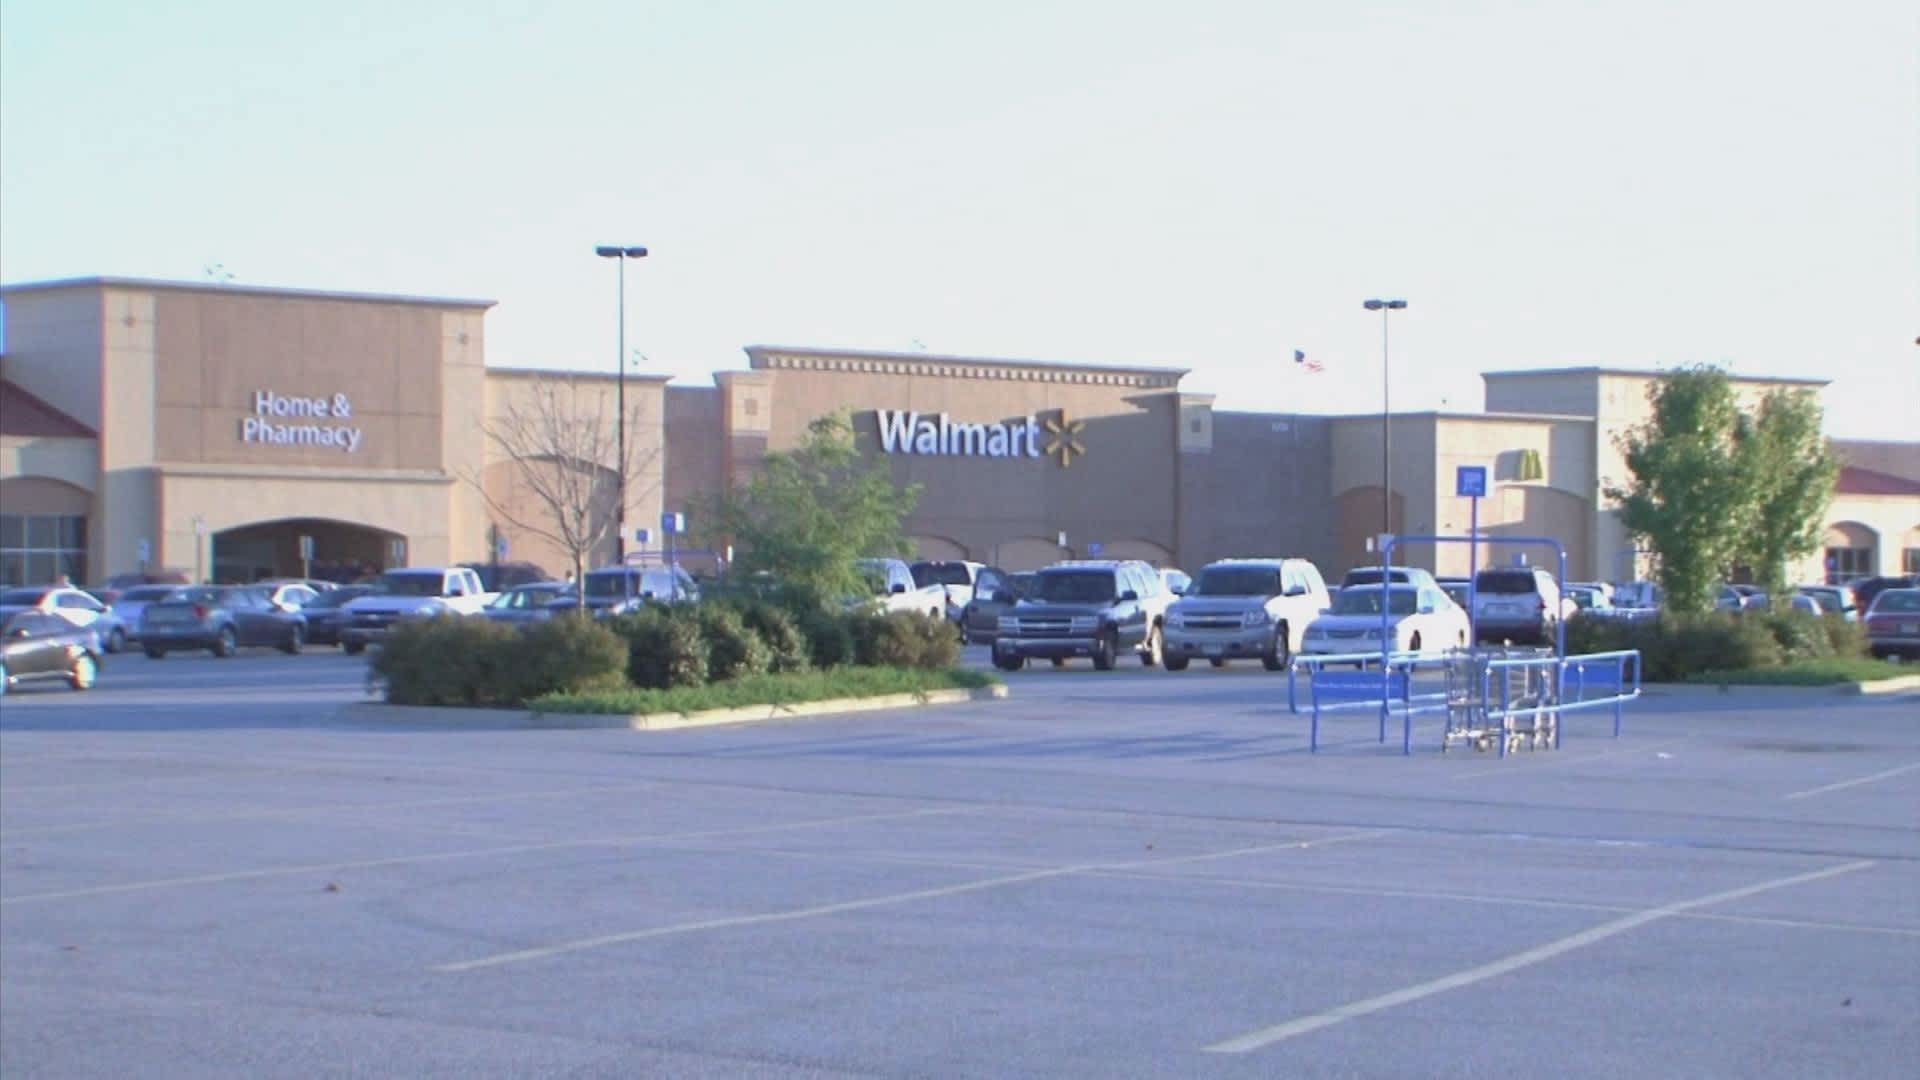 Walmart raises starting wages, handing out $1,000 bonuses - The